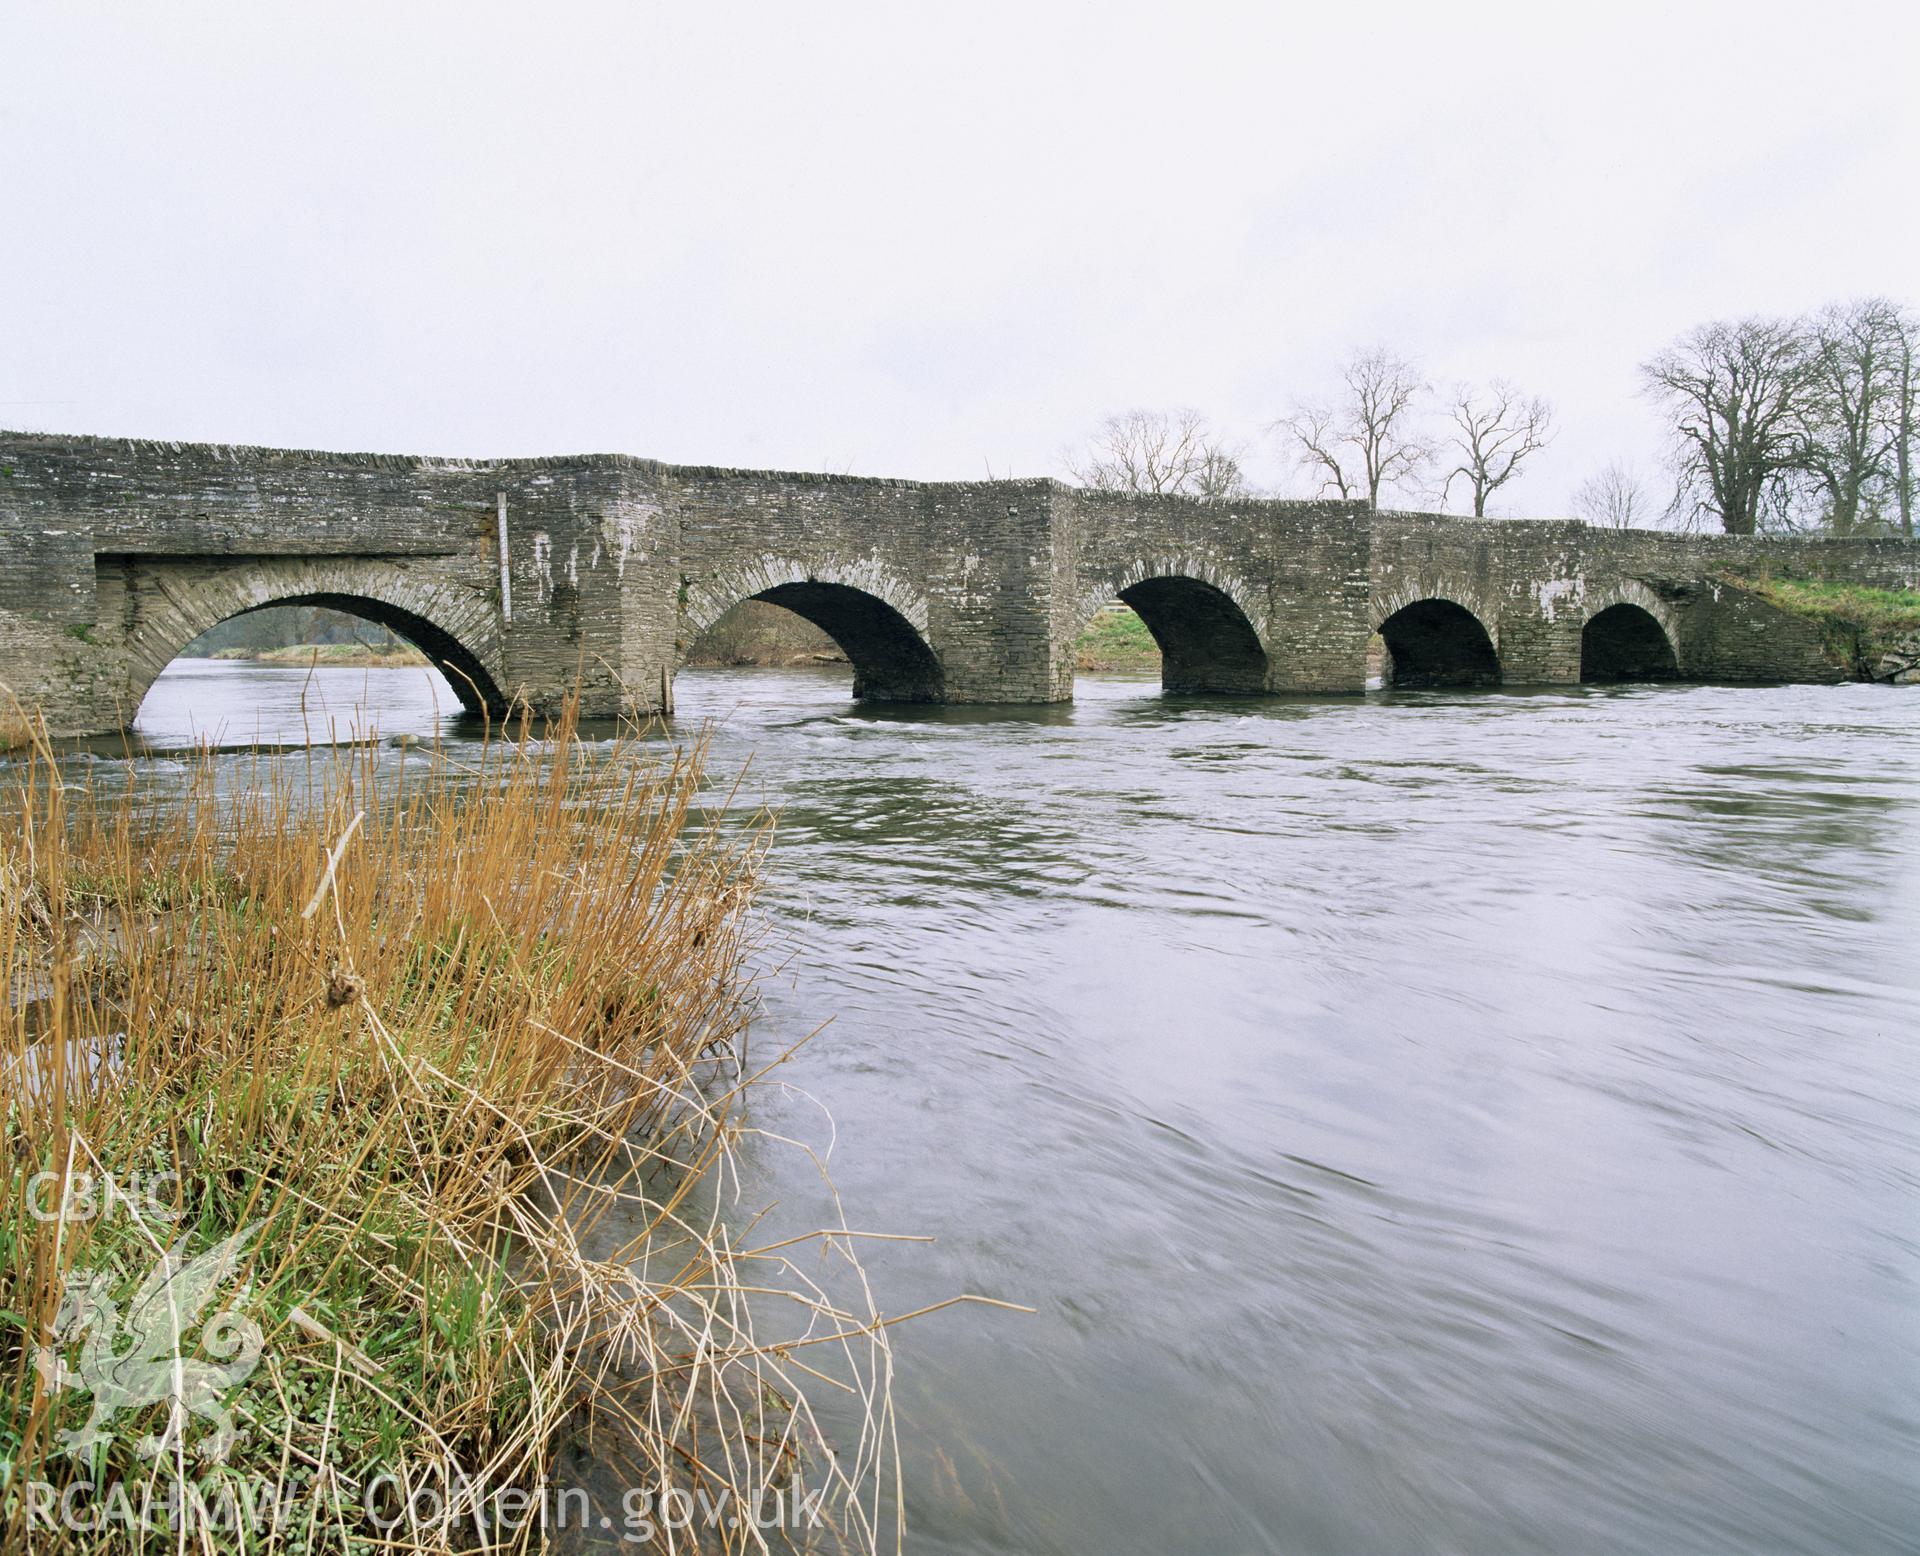 Colour transparency showing Llechryd Bridge, produced by Iain Wright, June 2004